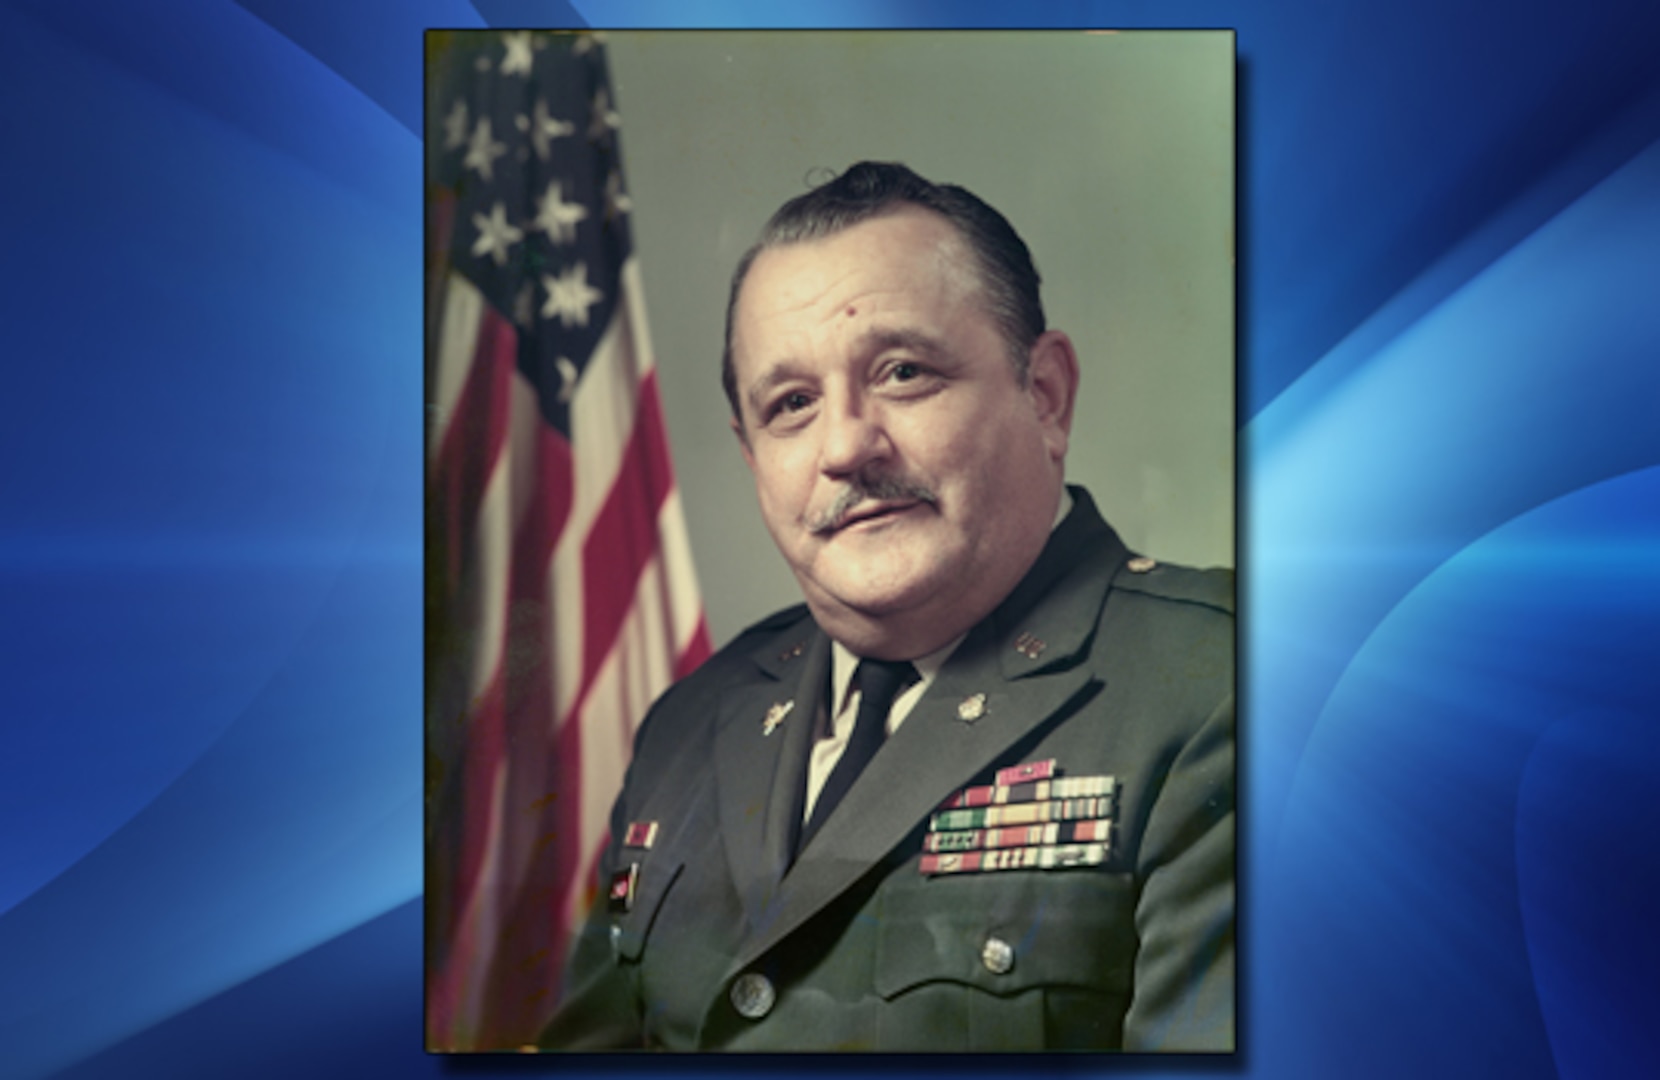 Retired Army Col. Fredric Johnson, who served as a U.S. Army Quartermaster officer and petroleum specialist for more than three decades, passed away Aug. 8.